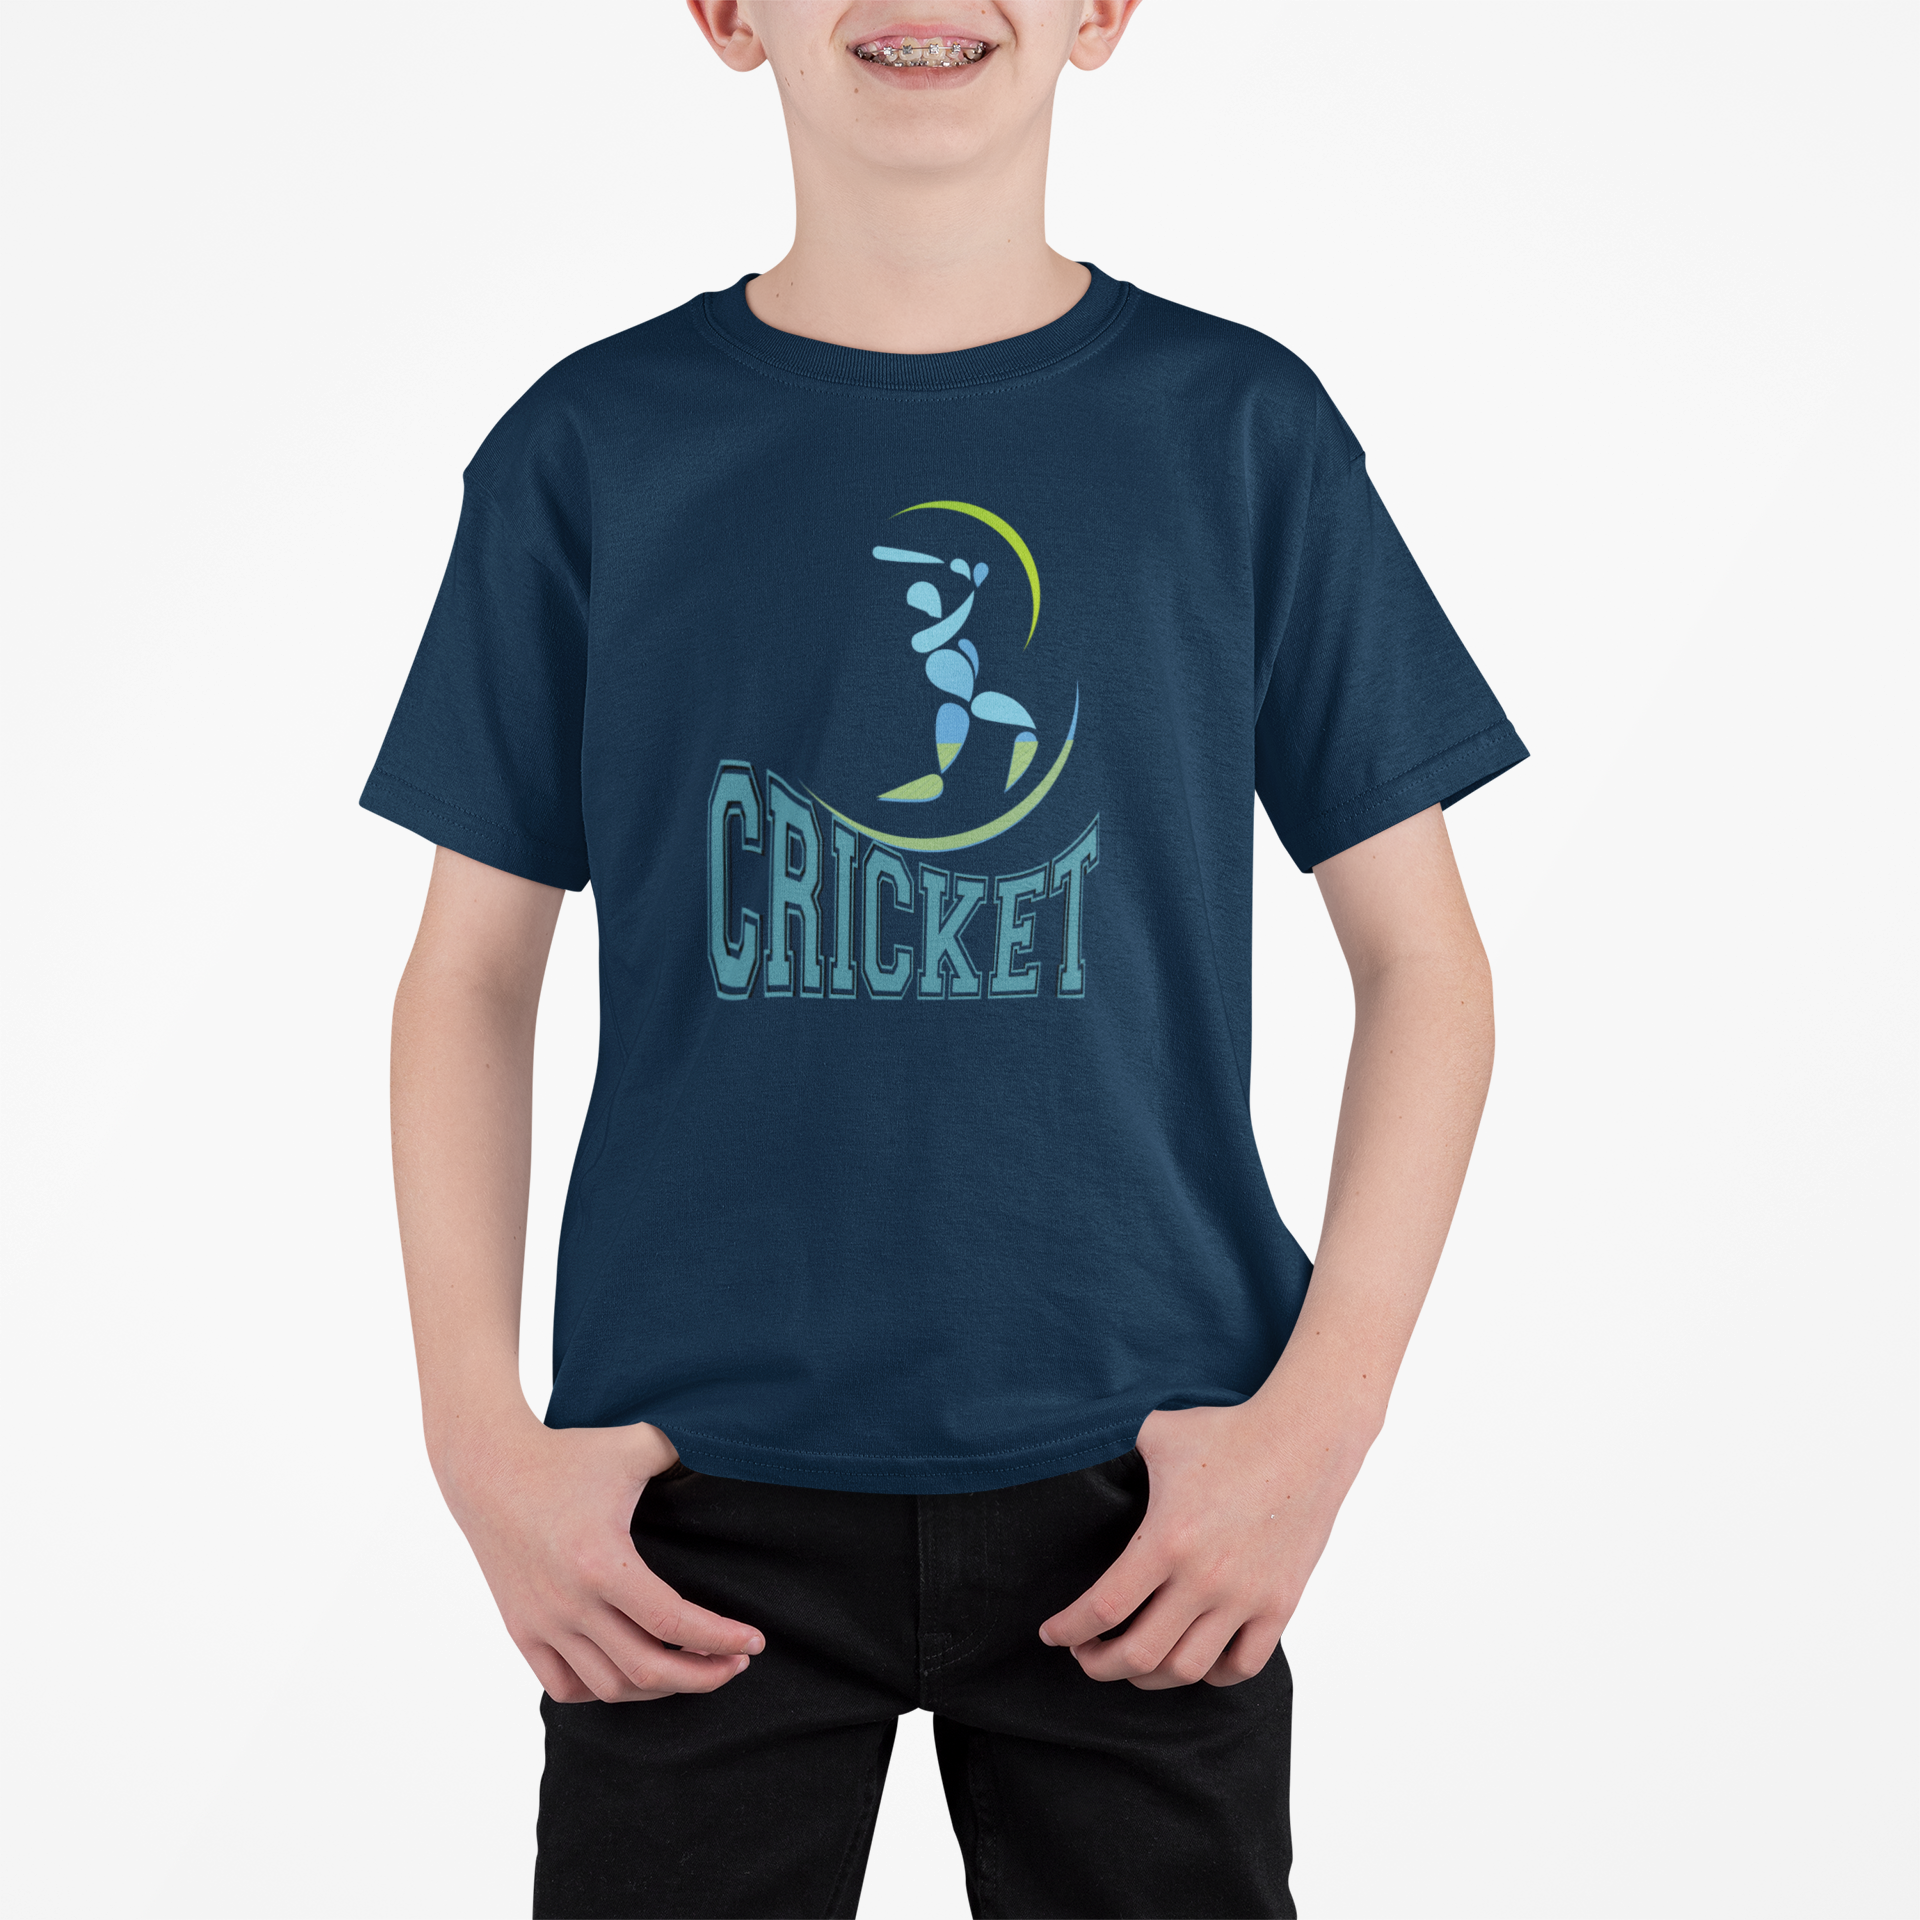 Cricketer T-shirt for Boys Navy Blue